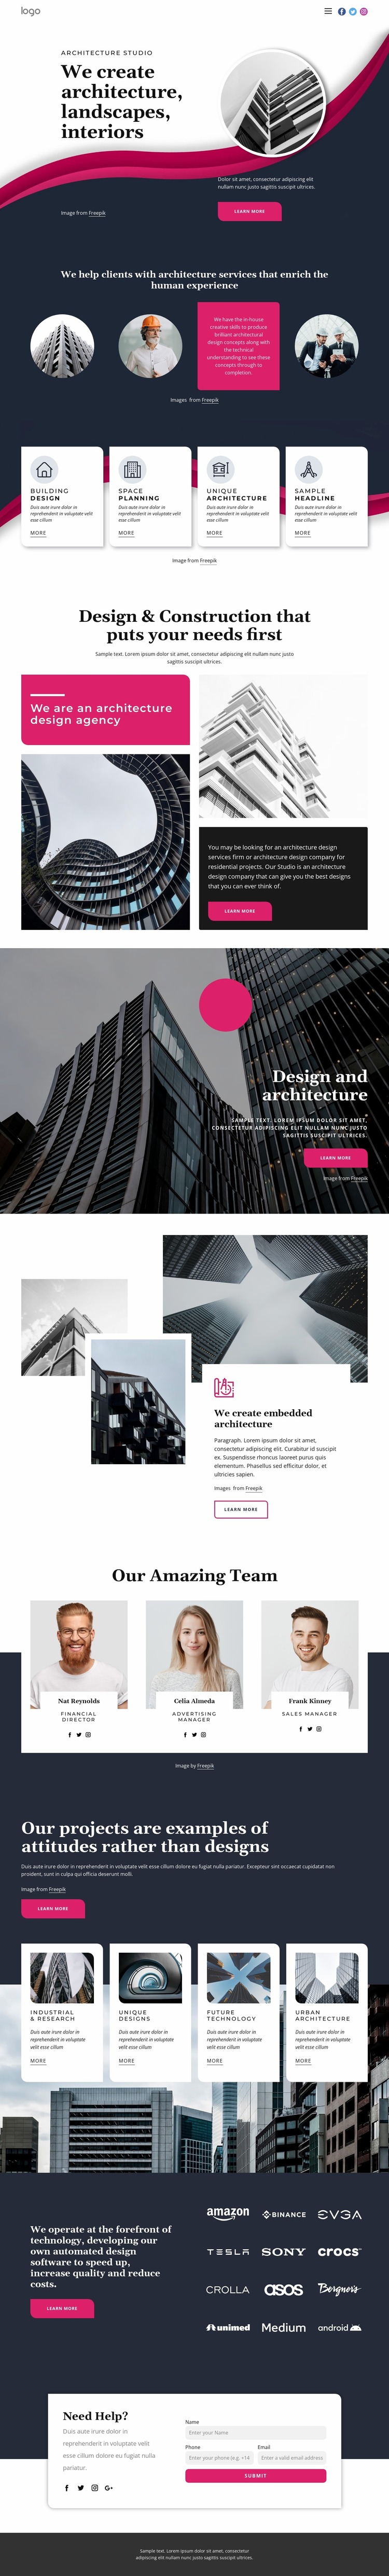 We create great architecture Website Mockup